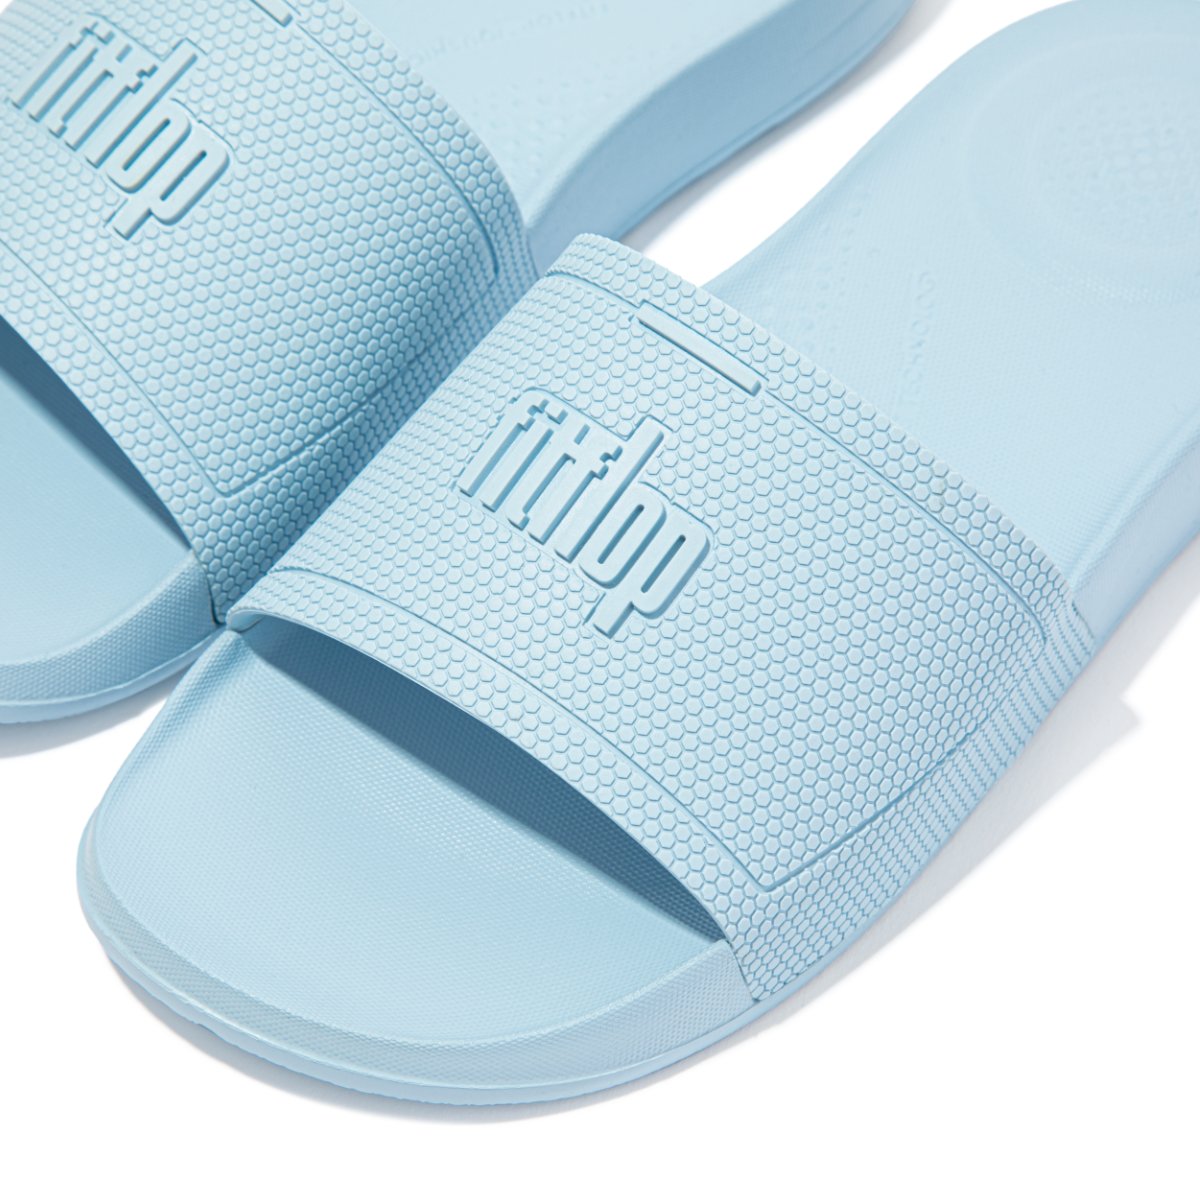 FitFlop iQUSHION Pool Sliders Sky Blue close up